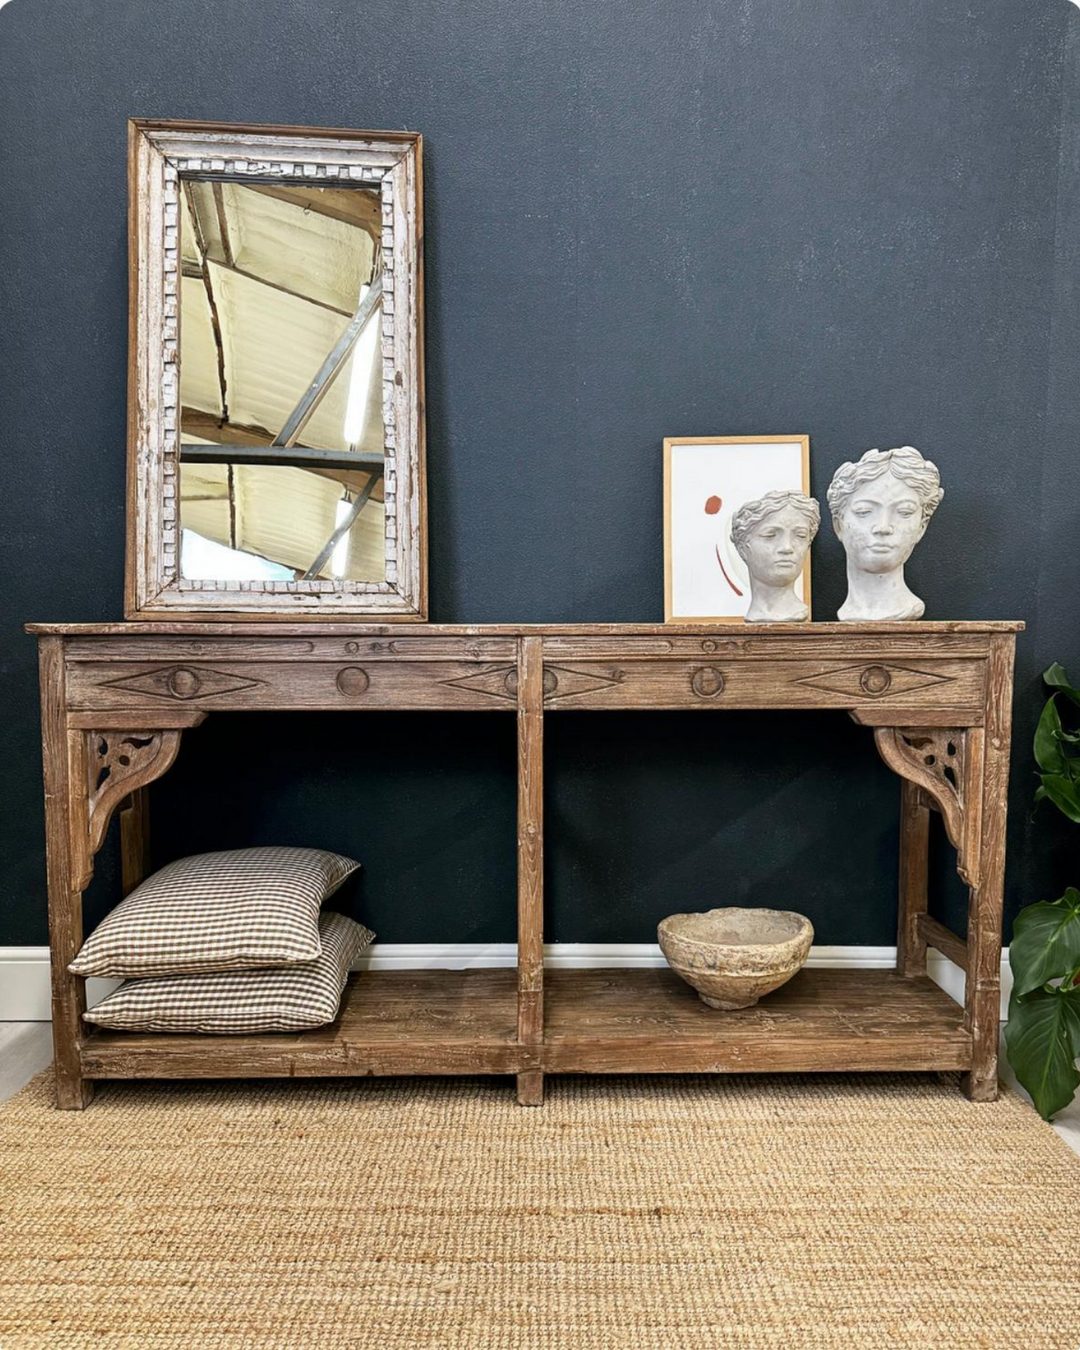 Reclaimed Vintage Indian Console Table